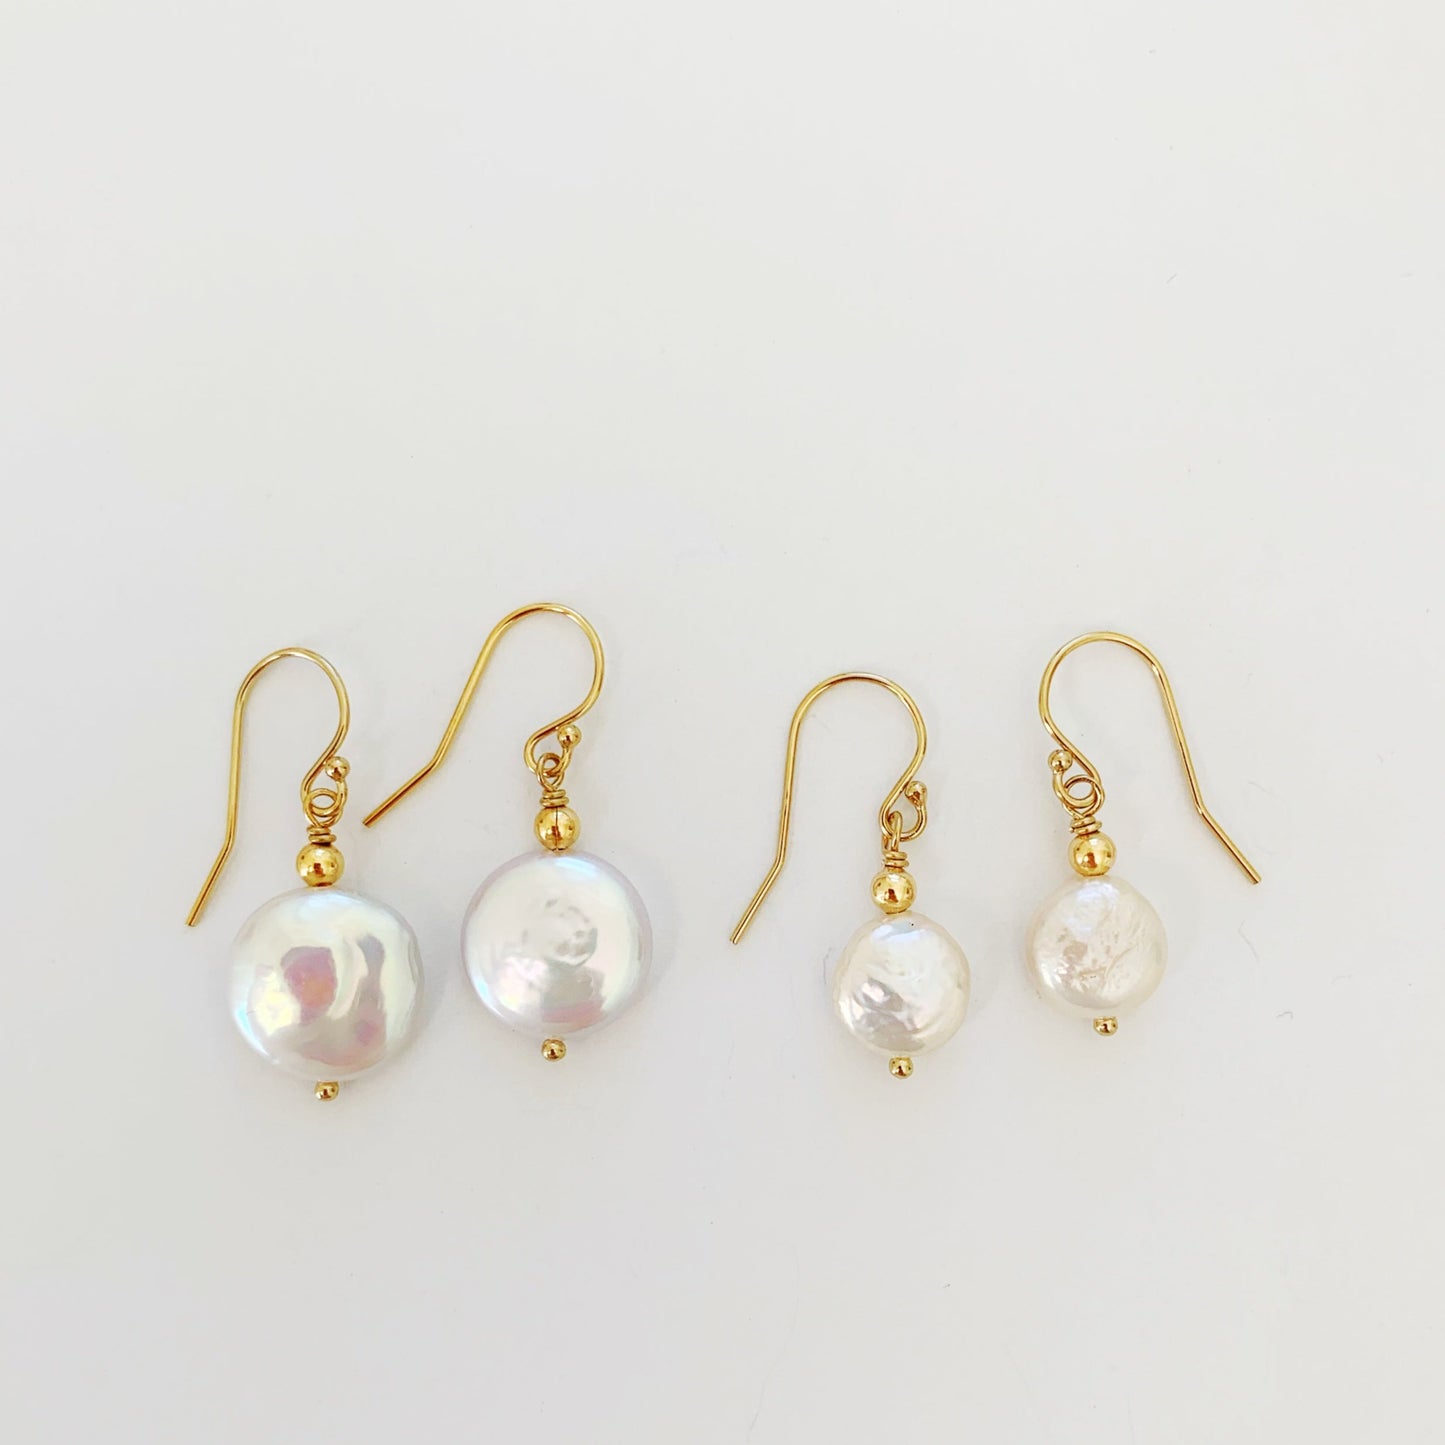 The newport gala earrings next to the newport earrings for a size comparison. both pair pictured next to each other on a white background